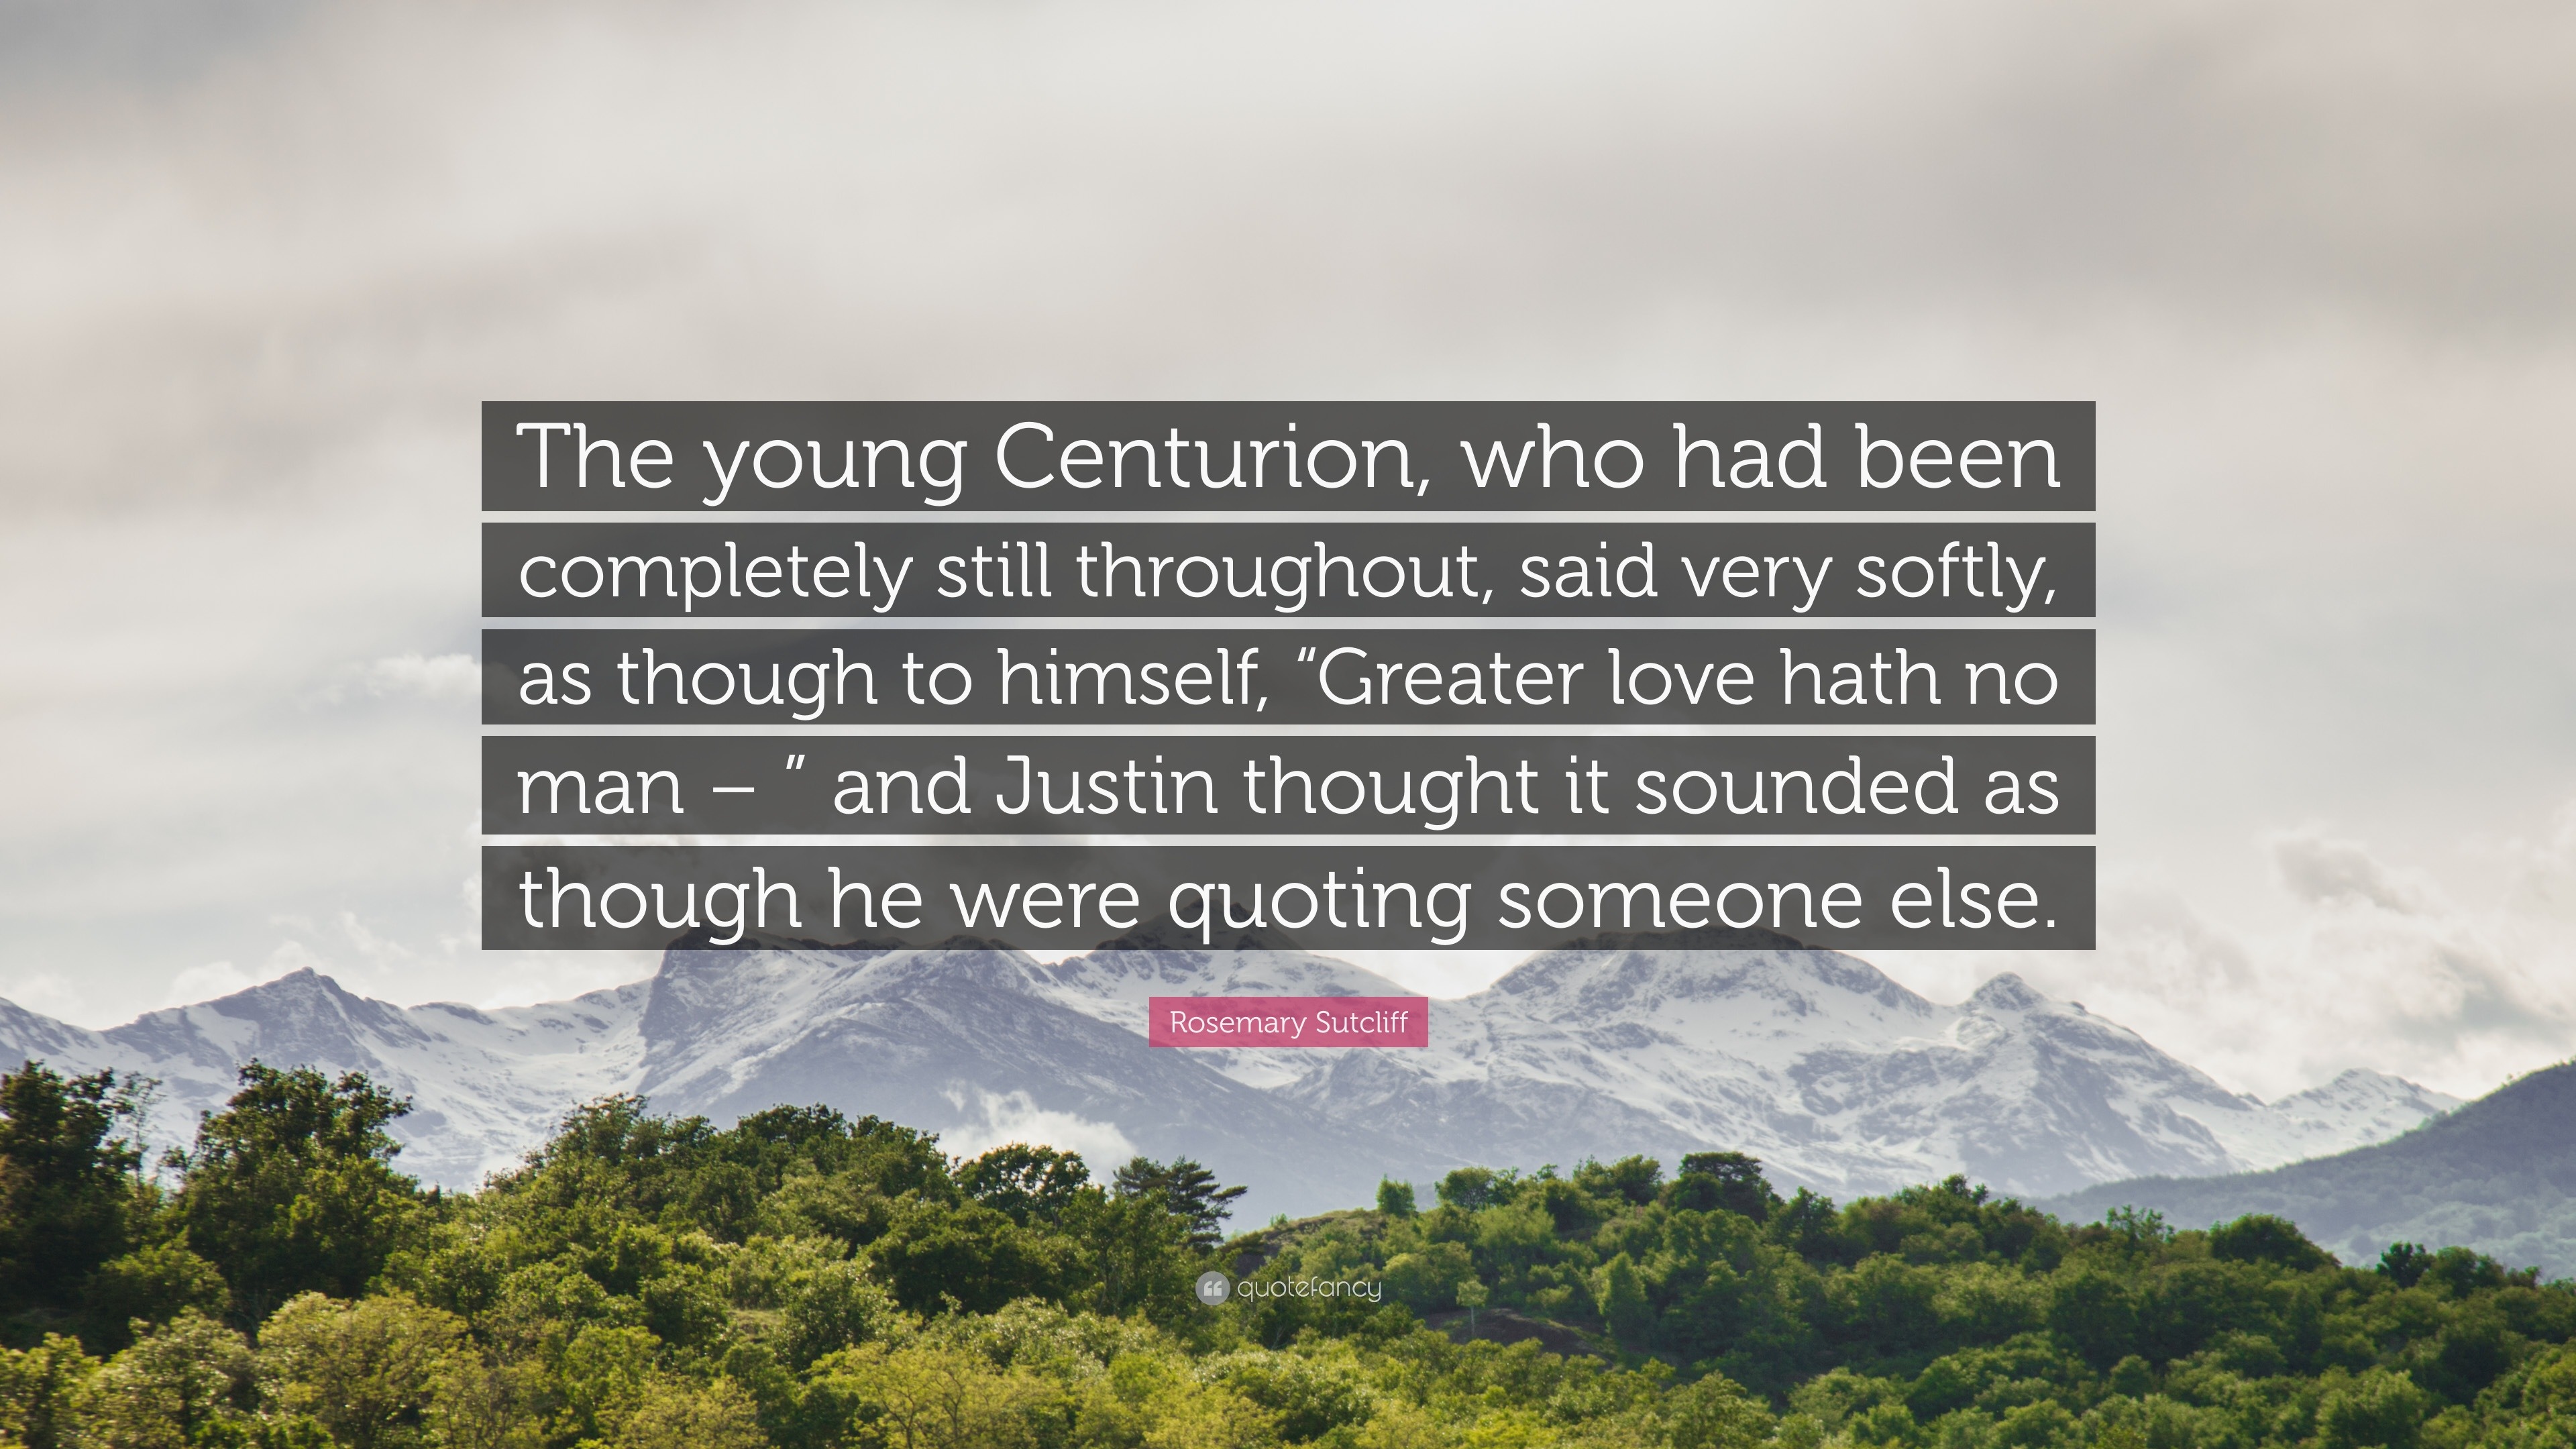 Rosemary Sutcliff Quote “The young Centurion who had been pletely still throughout